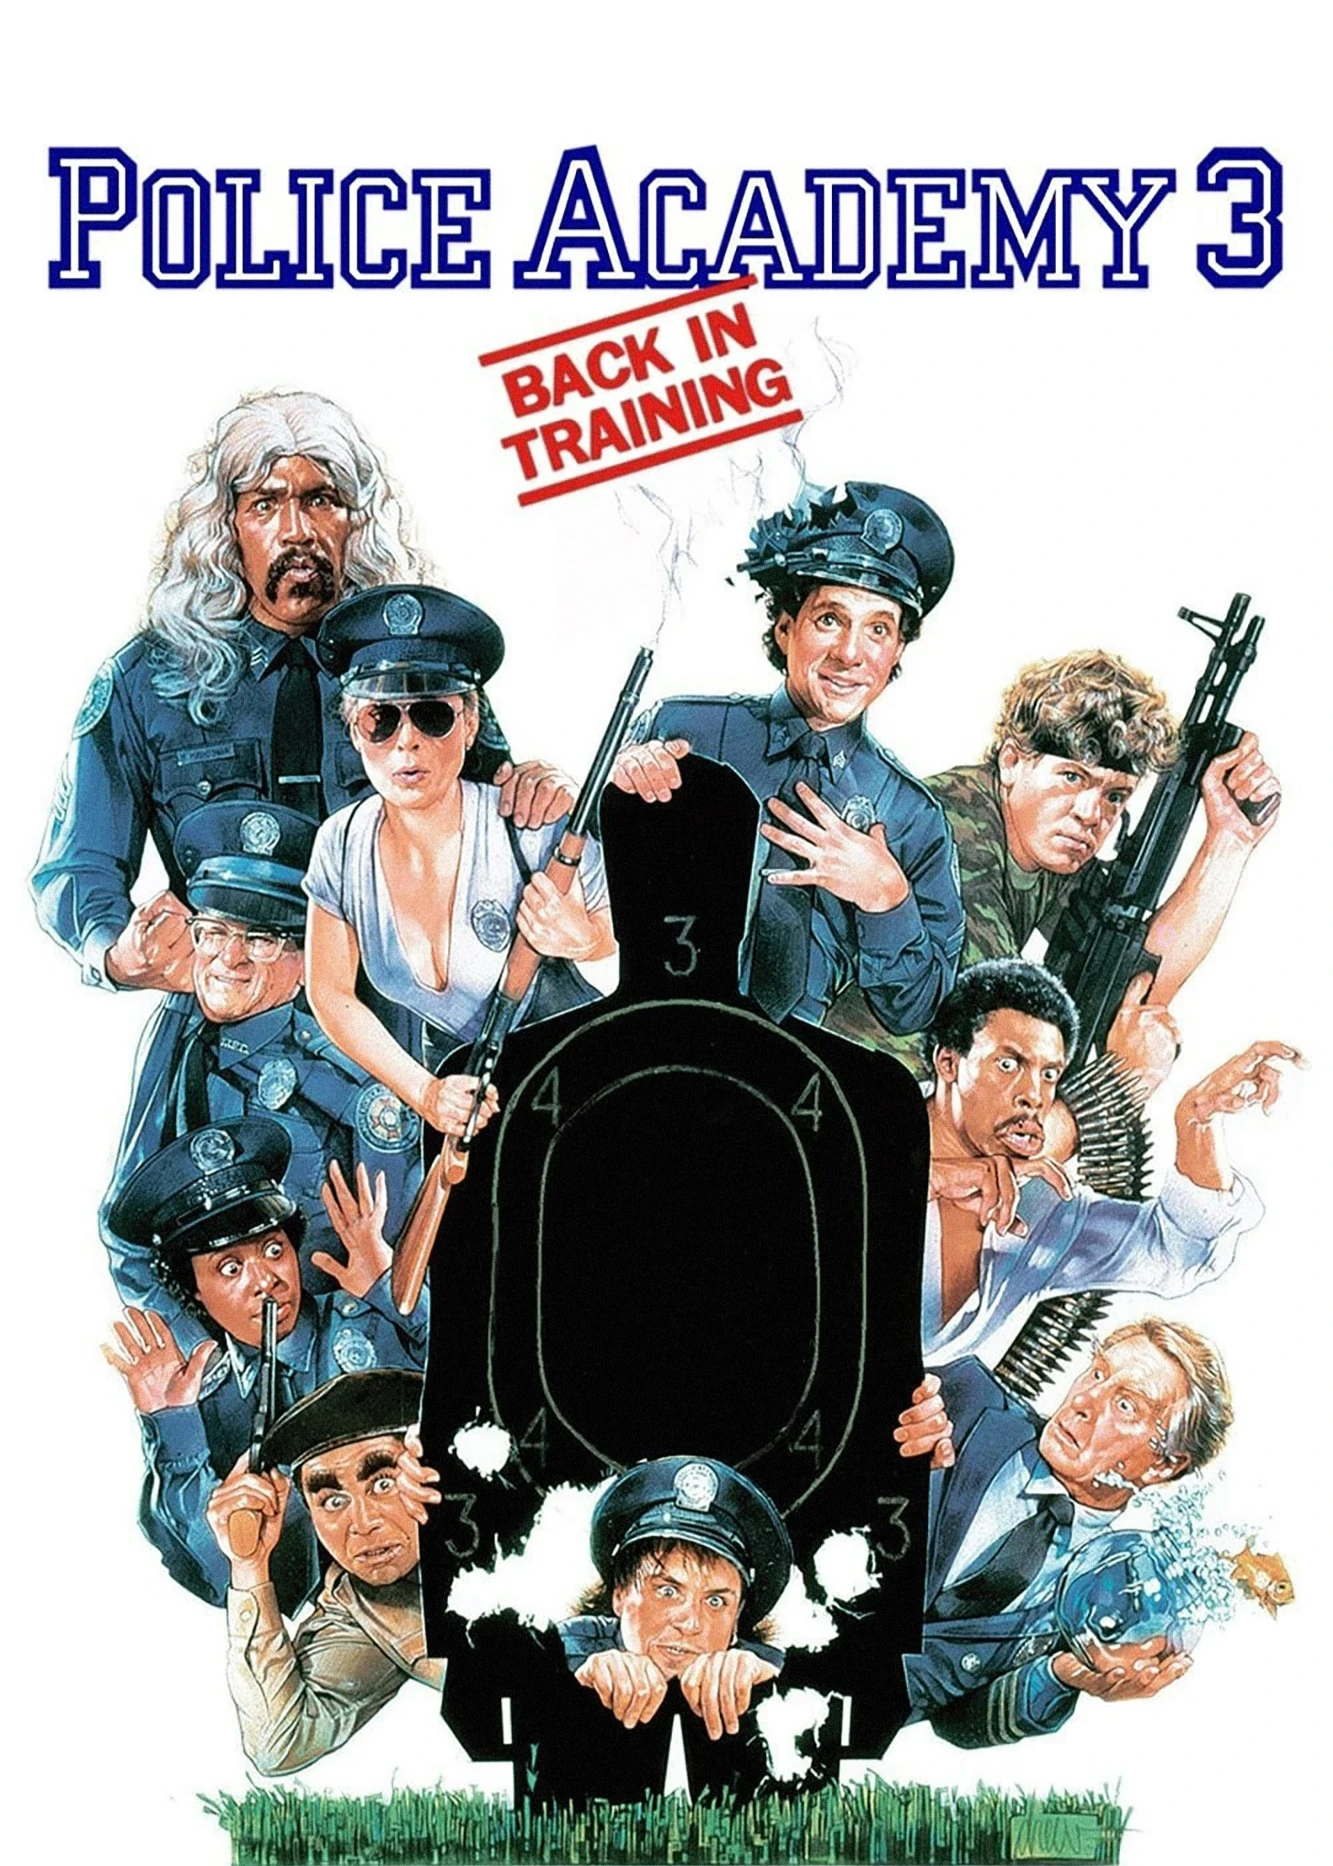 Police Academy 3: Back in Training | Police Academy 3: Back in Training (1986)